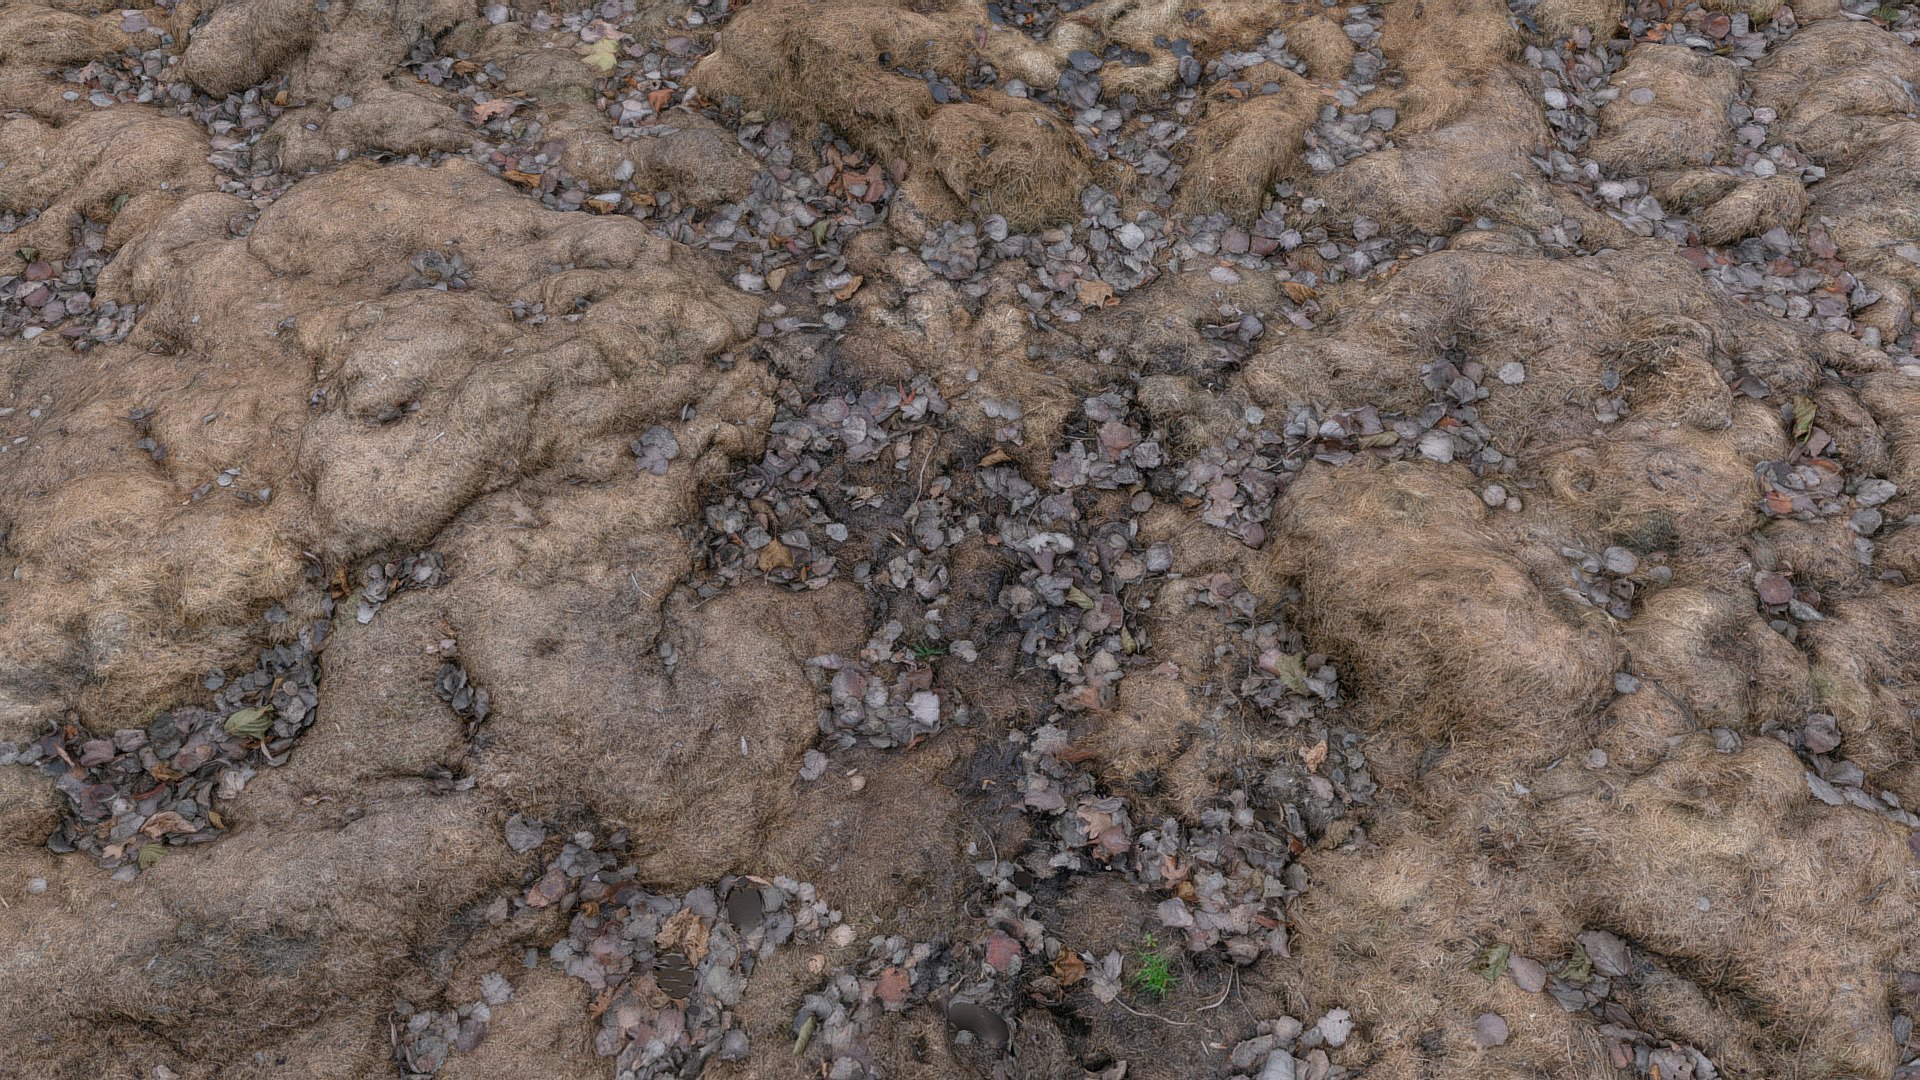 Semi decomposed Composted cut grass mown lawn waste junk heap composter bin gardening pile

photogrammetry scan (24MP x 250 photos, 3x16K texture + HD normals as additional .zip) - Composted cut grass - Buy Royalty Free 3D model by matousekfoto 3d model